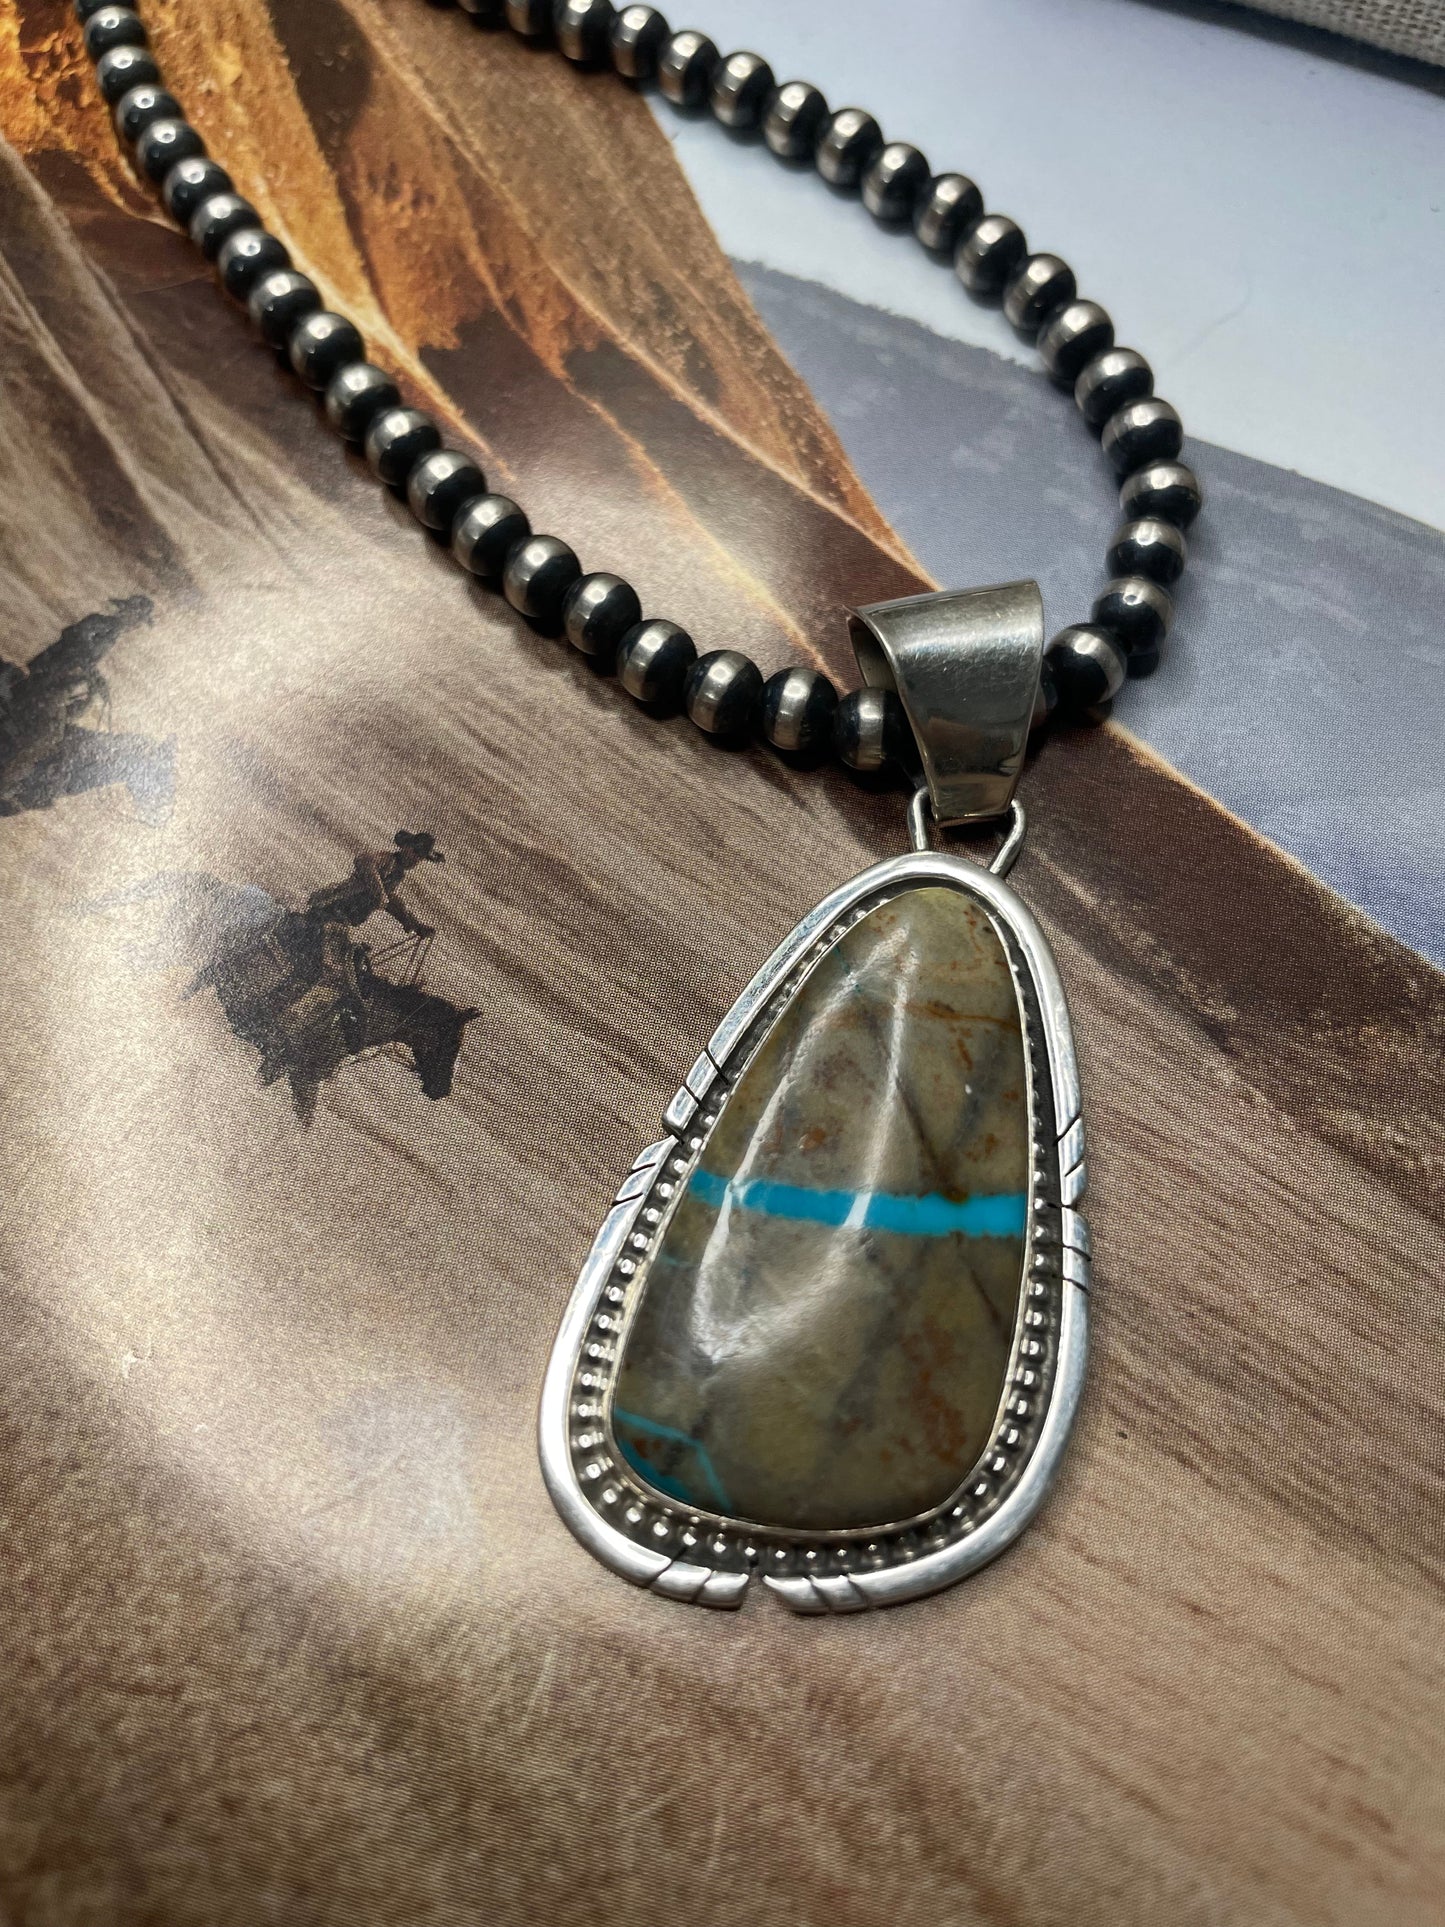 Navajo Sterling Silver & Turquoise Pendant Signed Sheila